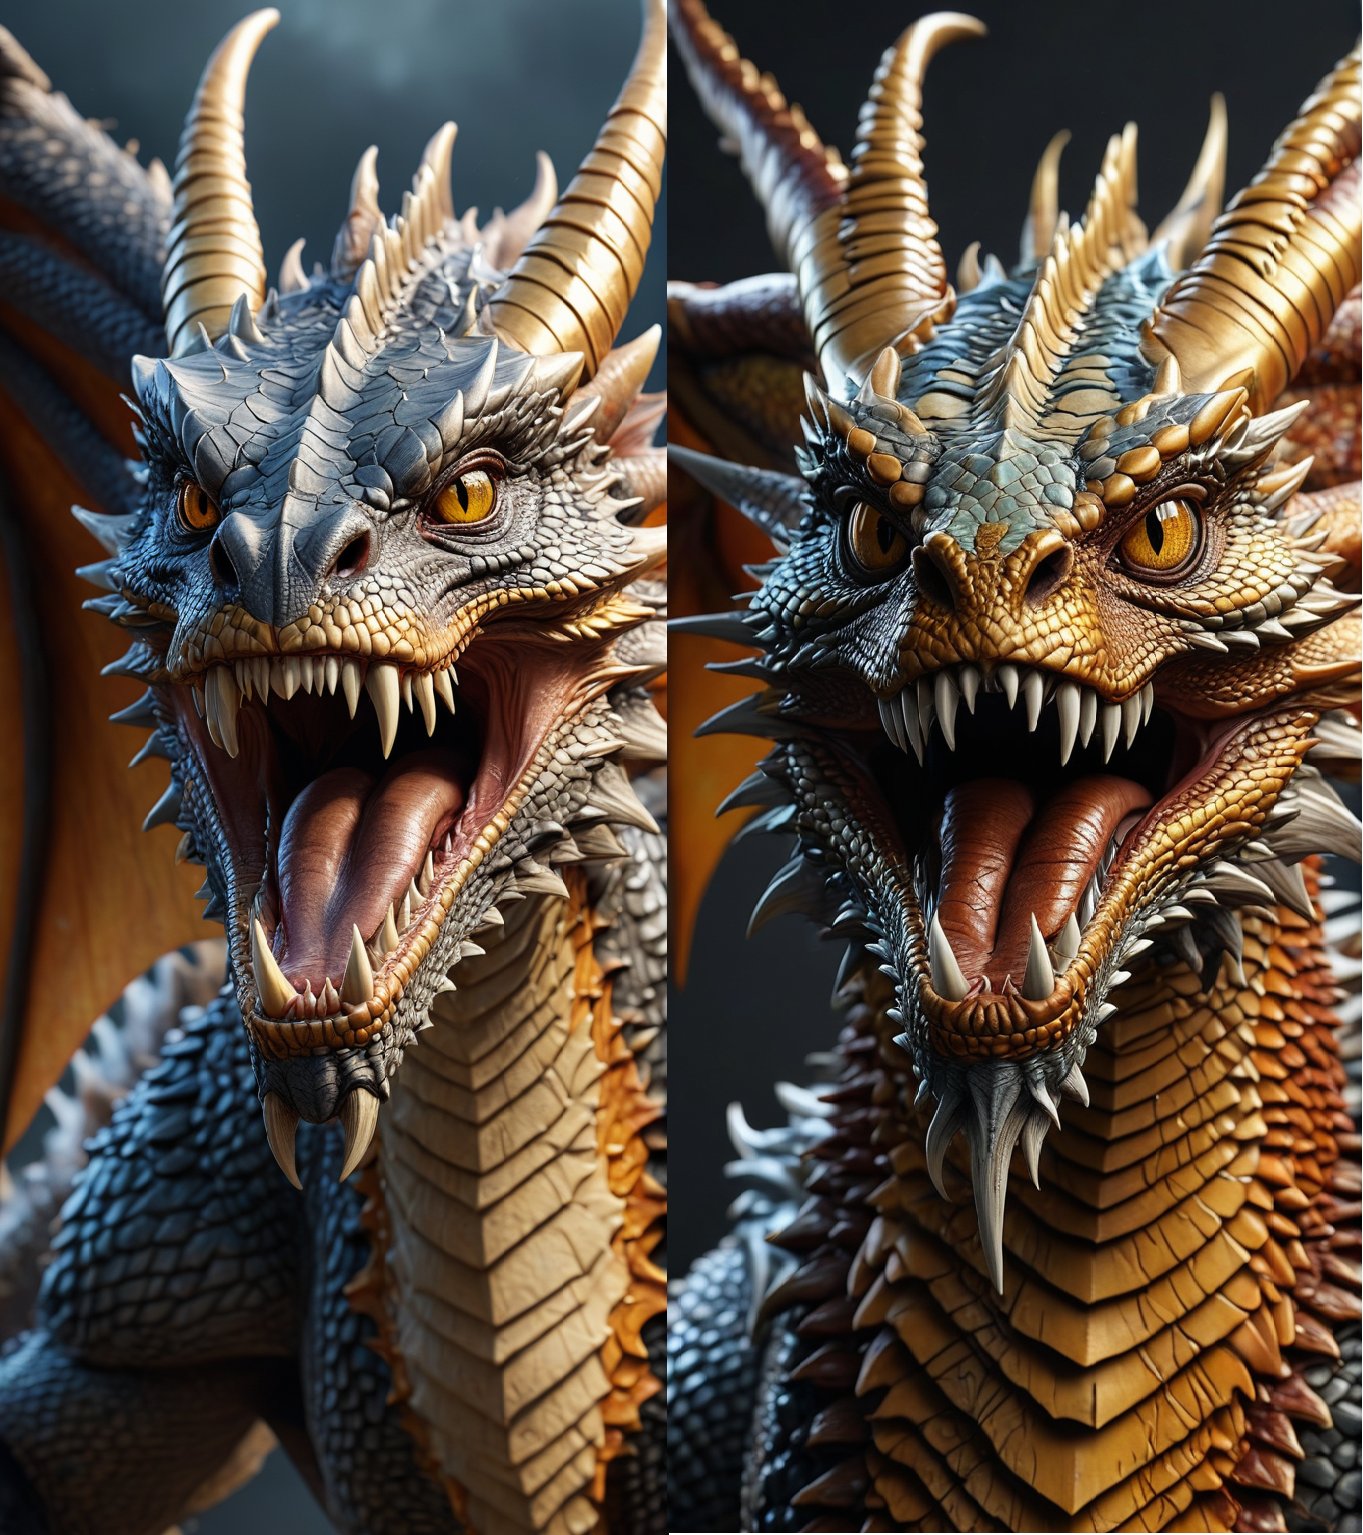 dragon_gold_animal_female_mithological_horns, scales,open mouth, teeth, fangs, wings, full body, front view, fantasy, epic sky background, PNG image format, sharp lines and borders, solid blocks of colors, over 300ppp dots per inch, 32k ultra high definition, 530MP, Fujifilm XT3, cinematographic, (photorealistic:1.6), 4D, High definition RAW color professional photos, photo, masterpiece, realistic, ProRAW, realism, photorealism, high contrast, digital art trending on Artstation ultra high definition detailed realistic, detailed, skin texture, hyper detailed, realistic skin texture, facial features, armature, best quality, ultra high res, high resolution, detailed, raw photo, sharp re, lens rich colors hyper realistic lifelike texture dramatic lighting unrealengine trending, ultra sharp,Dragon,SDXL